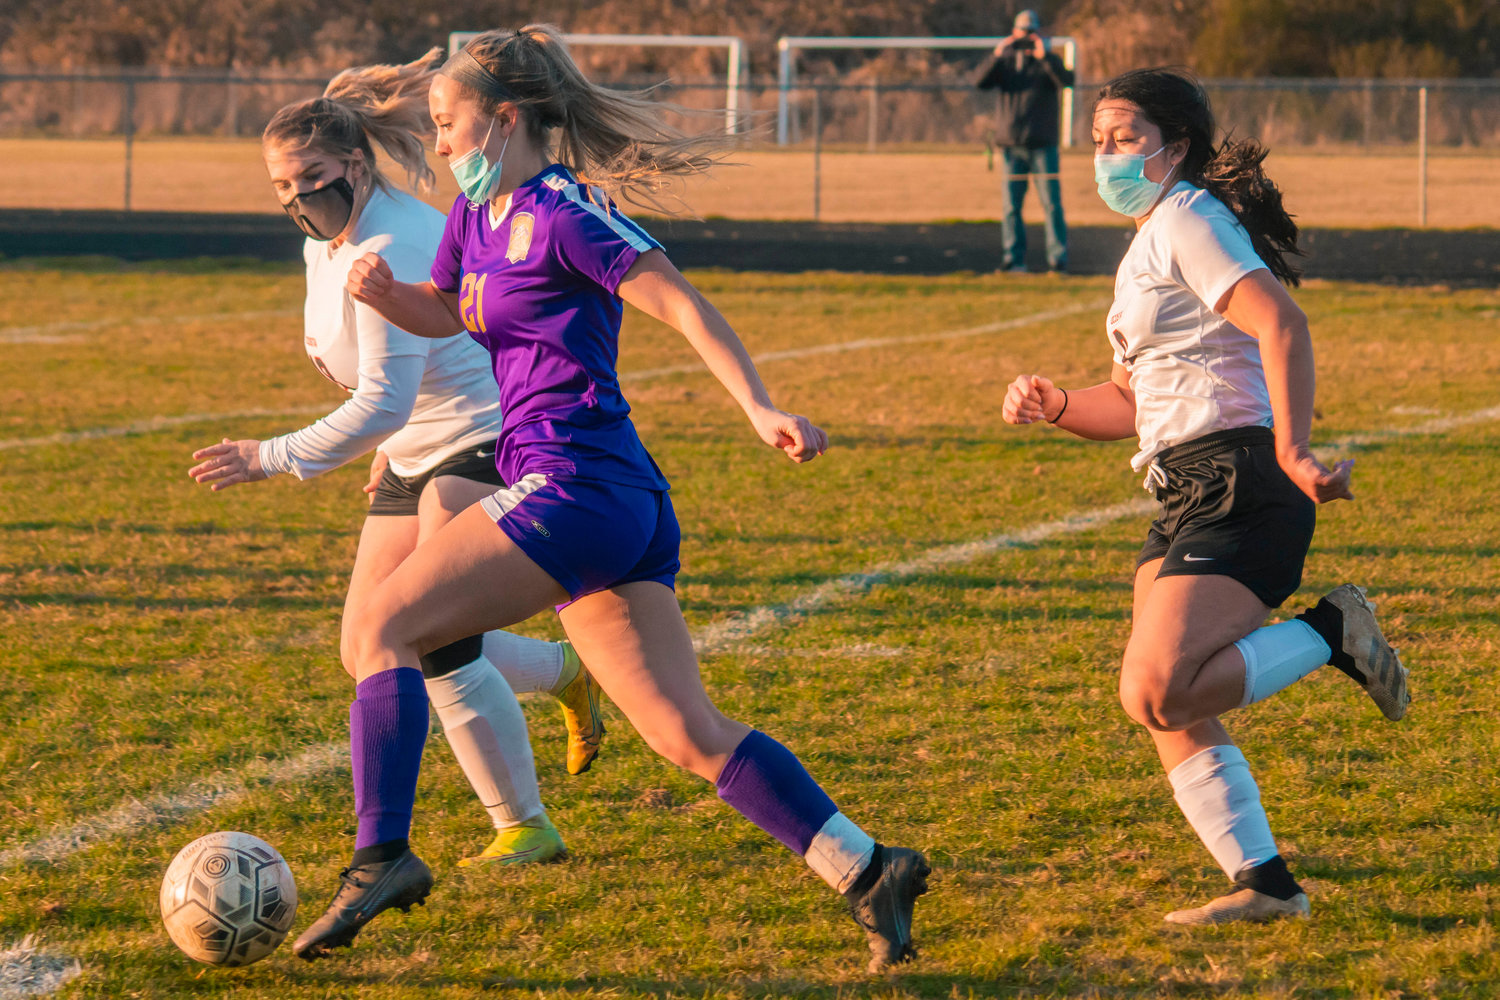 Onalaska’s Callie Lawrence (21) takes the ball down field during a game against Ocosta on Tuesday.